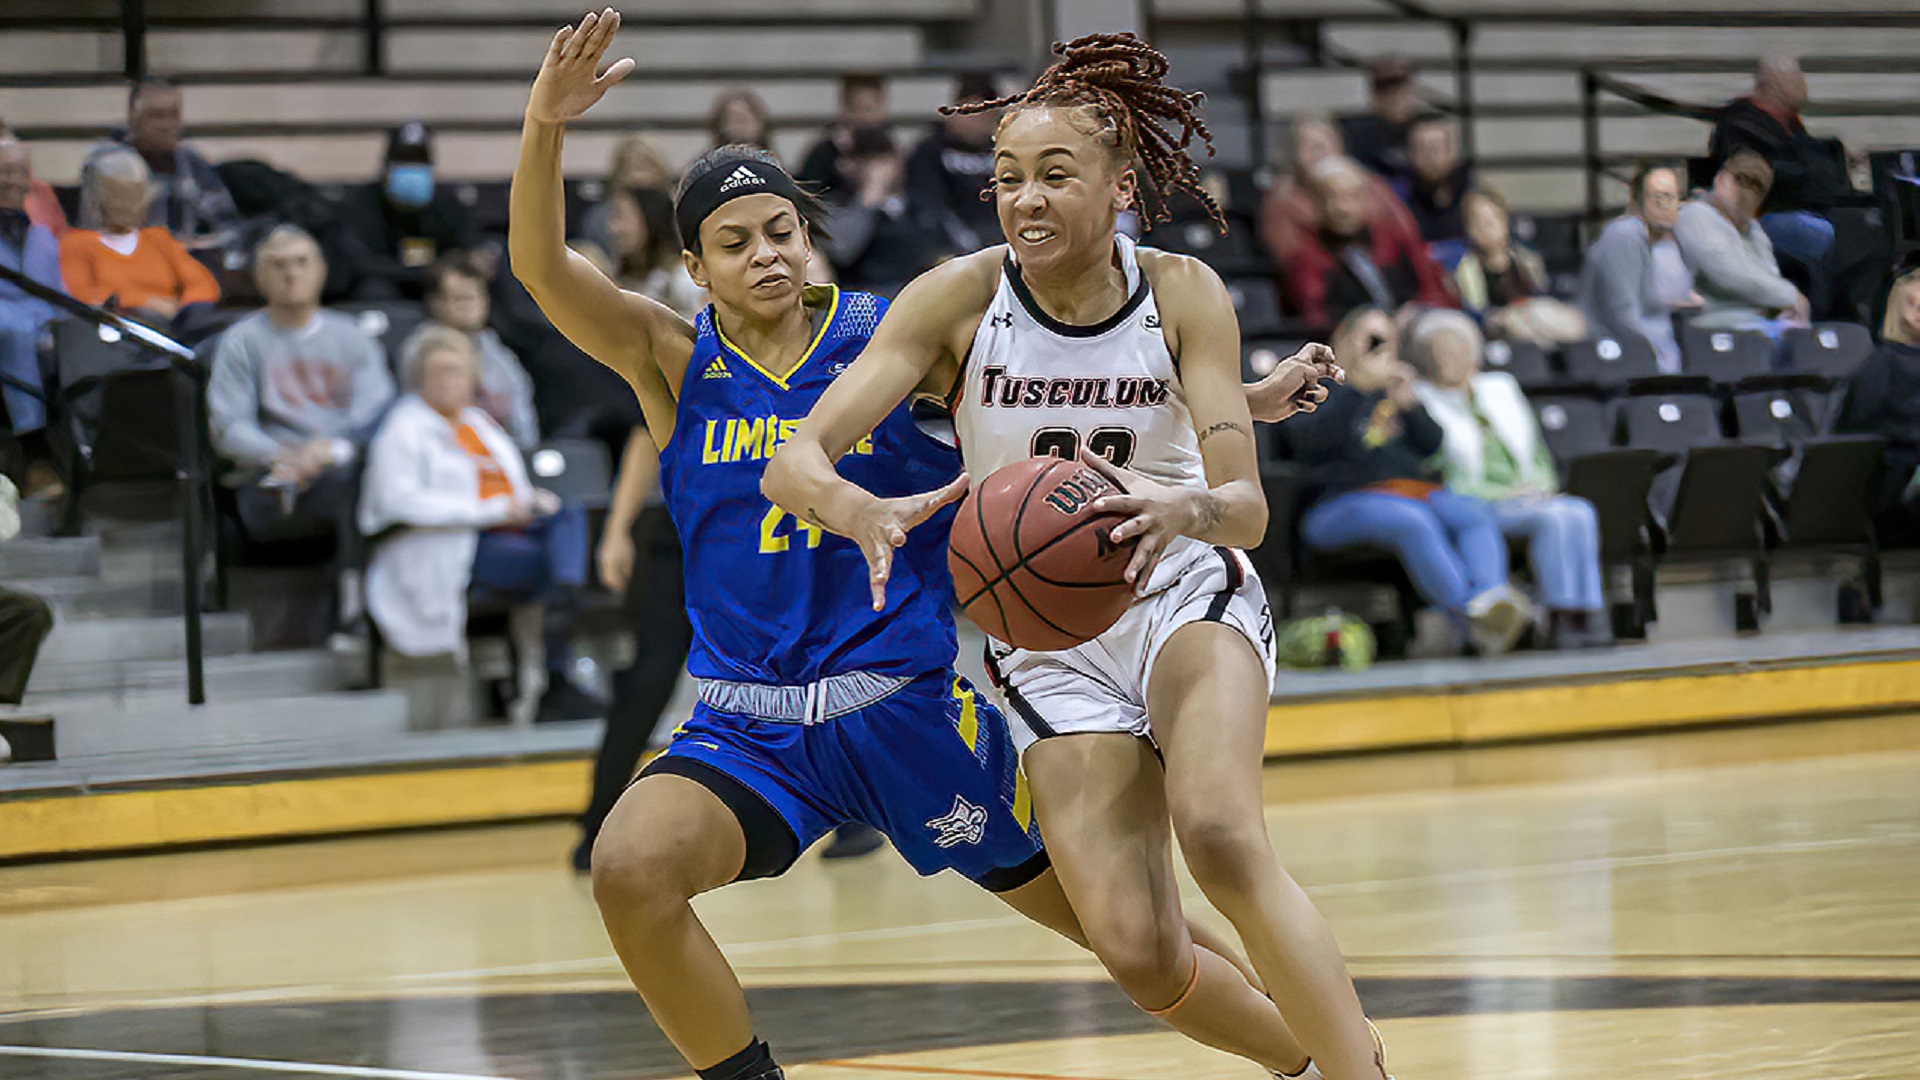 Pioneers grab third straight win with 56-49 victory at Limestone